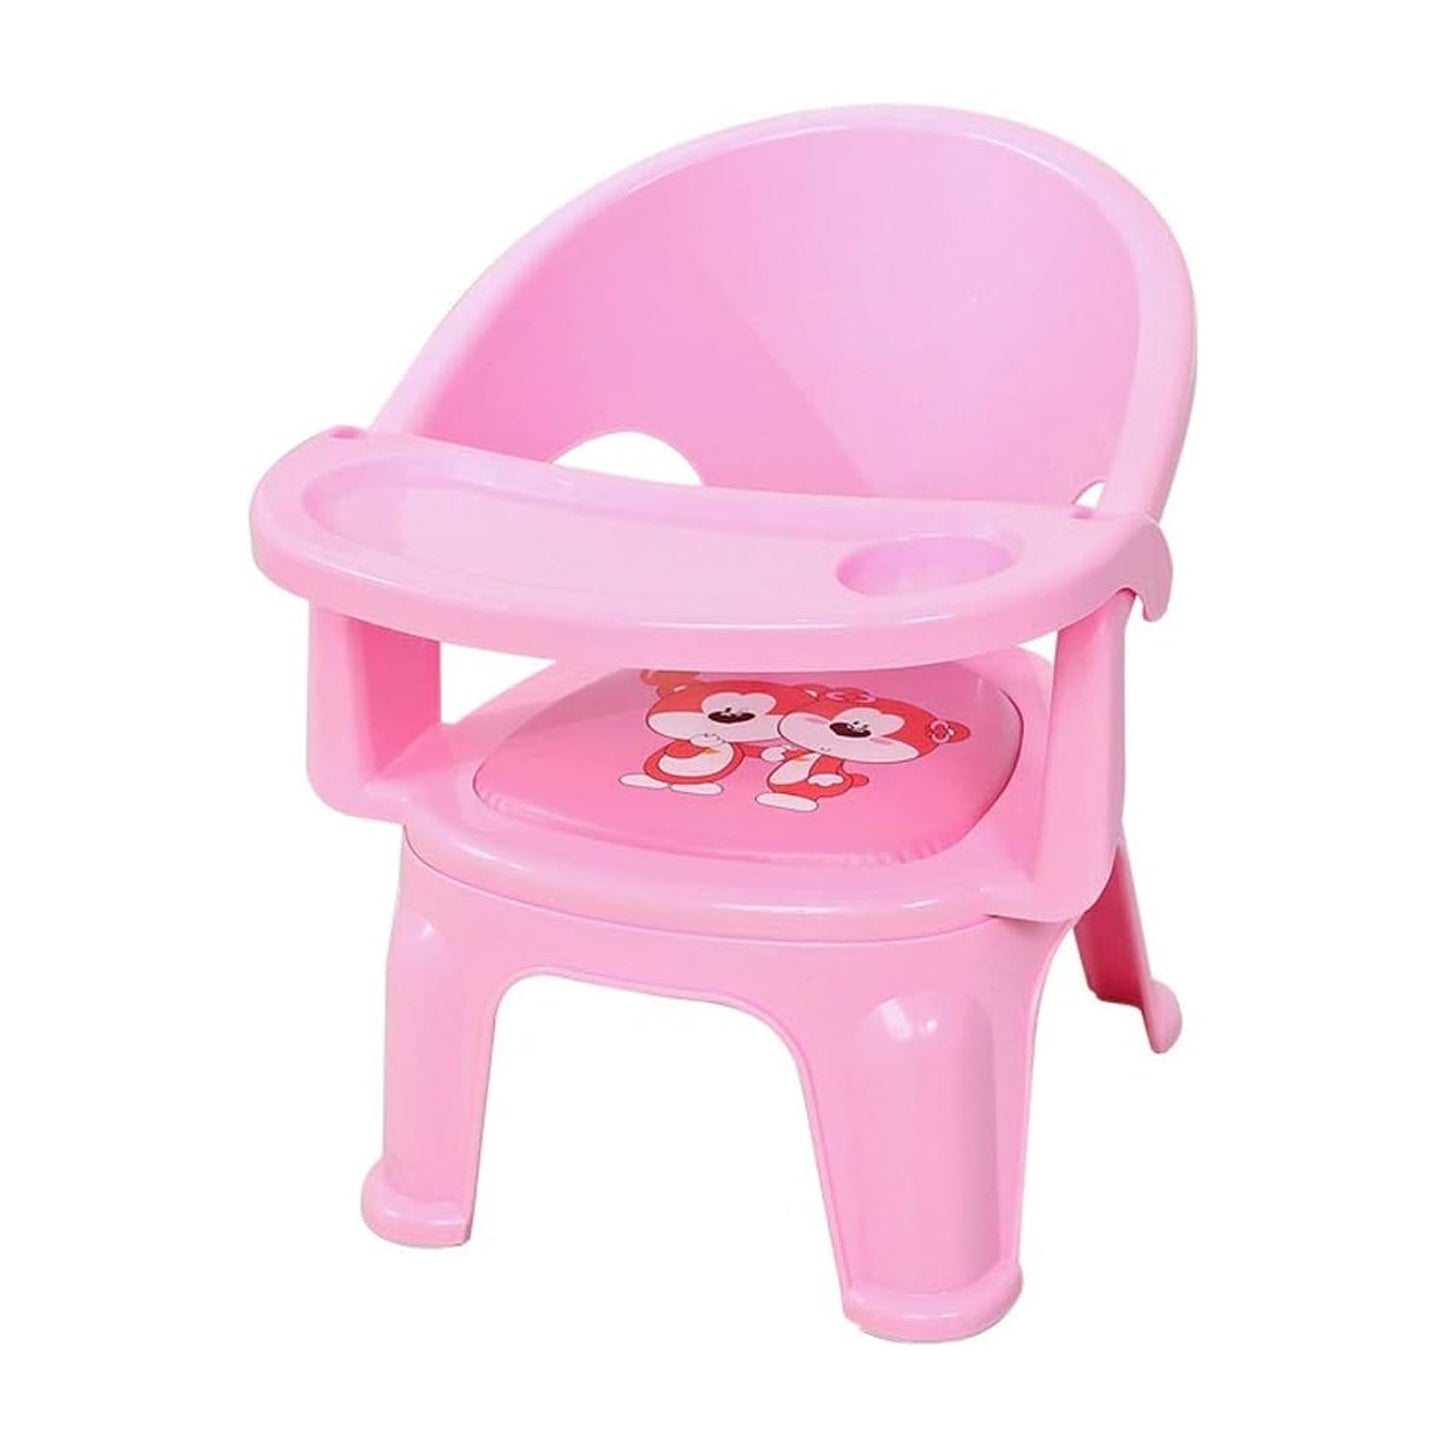 3183 Baby Chair, with Tray Strong and Durable Plastic Chair for Kids/Plastic School Study Chair/Feeding Chair for Kids, Portable High Chair for Kids